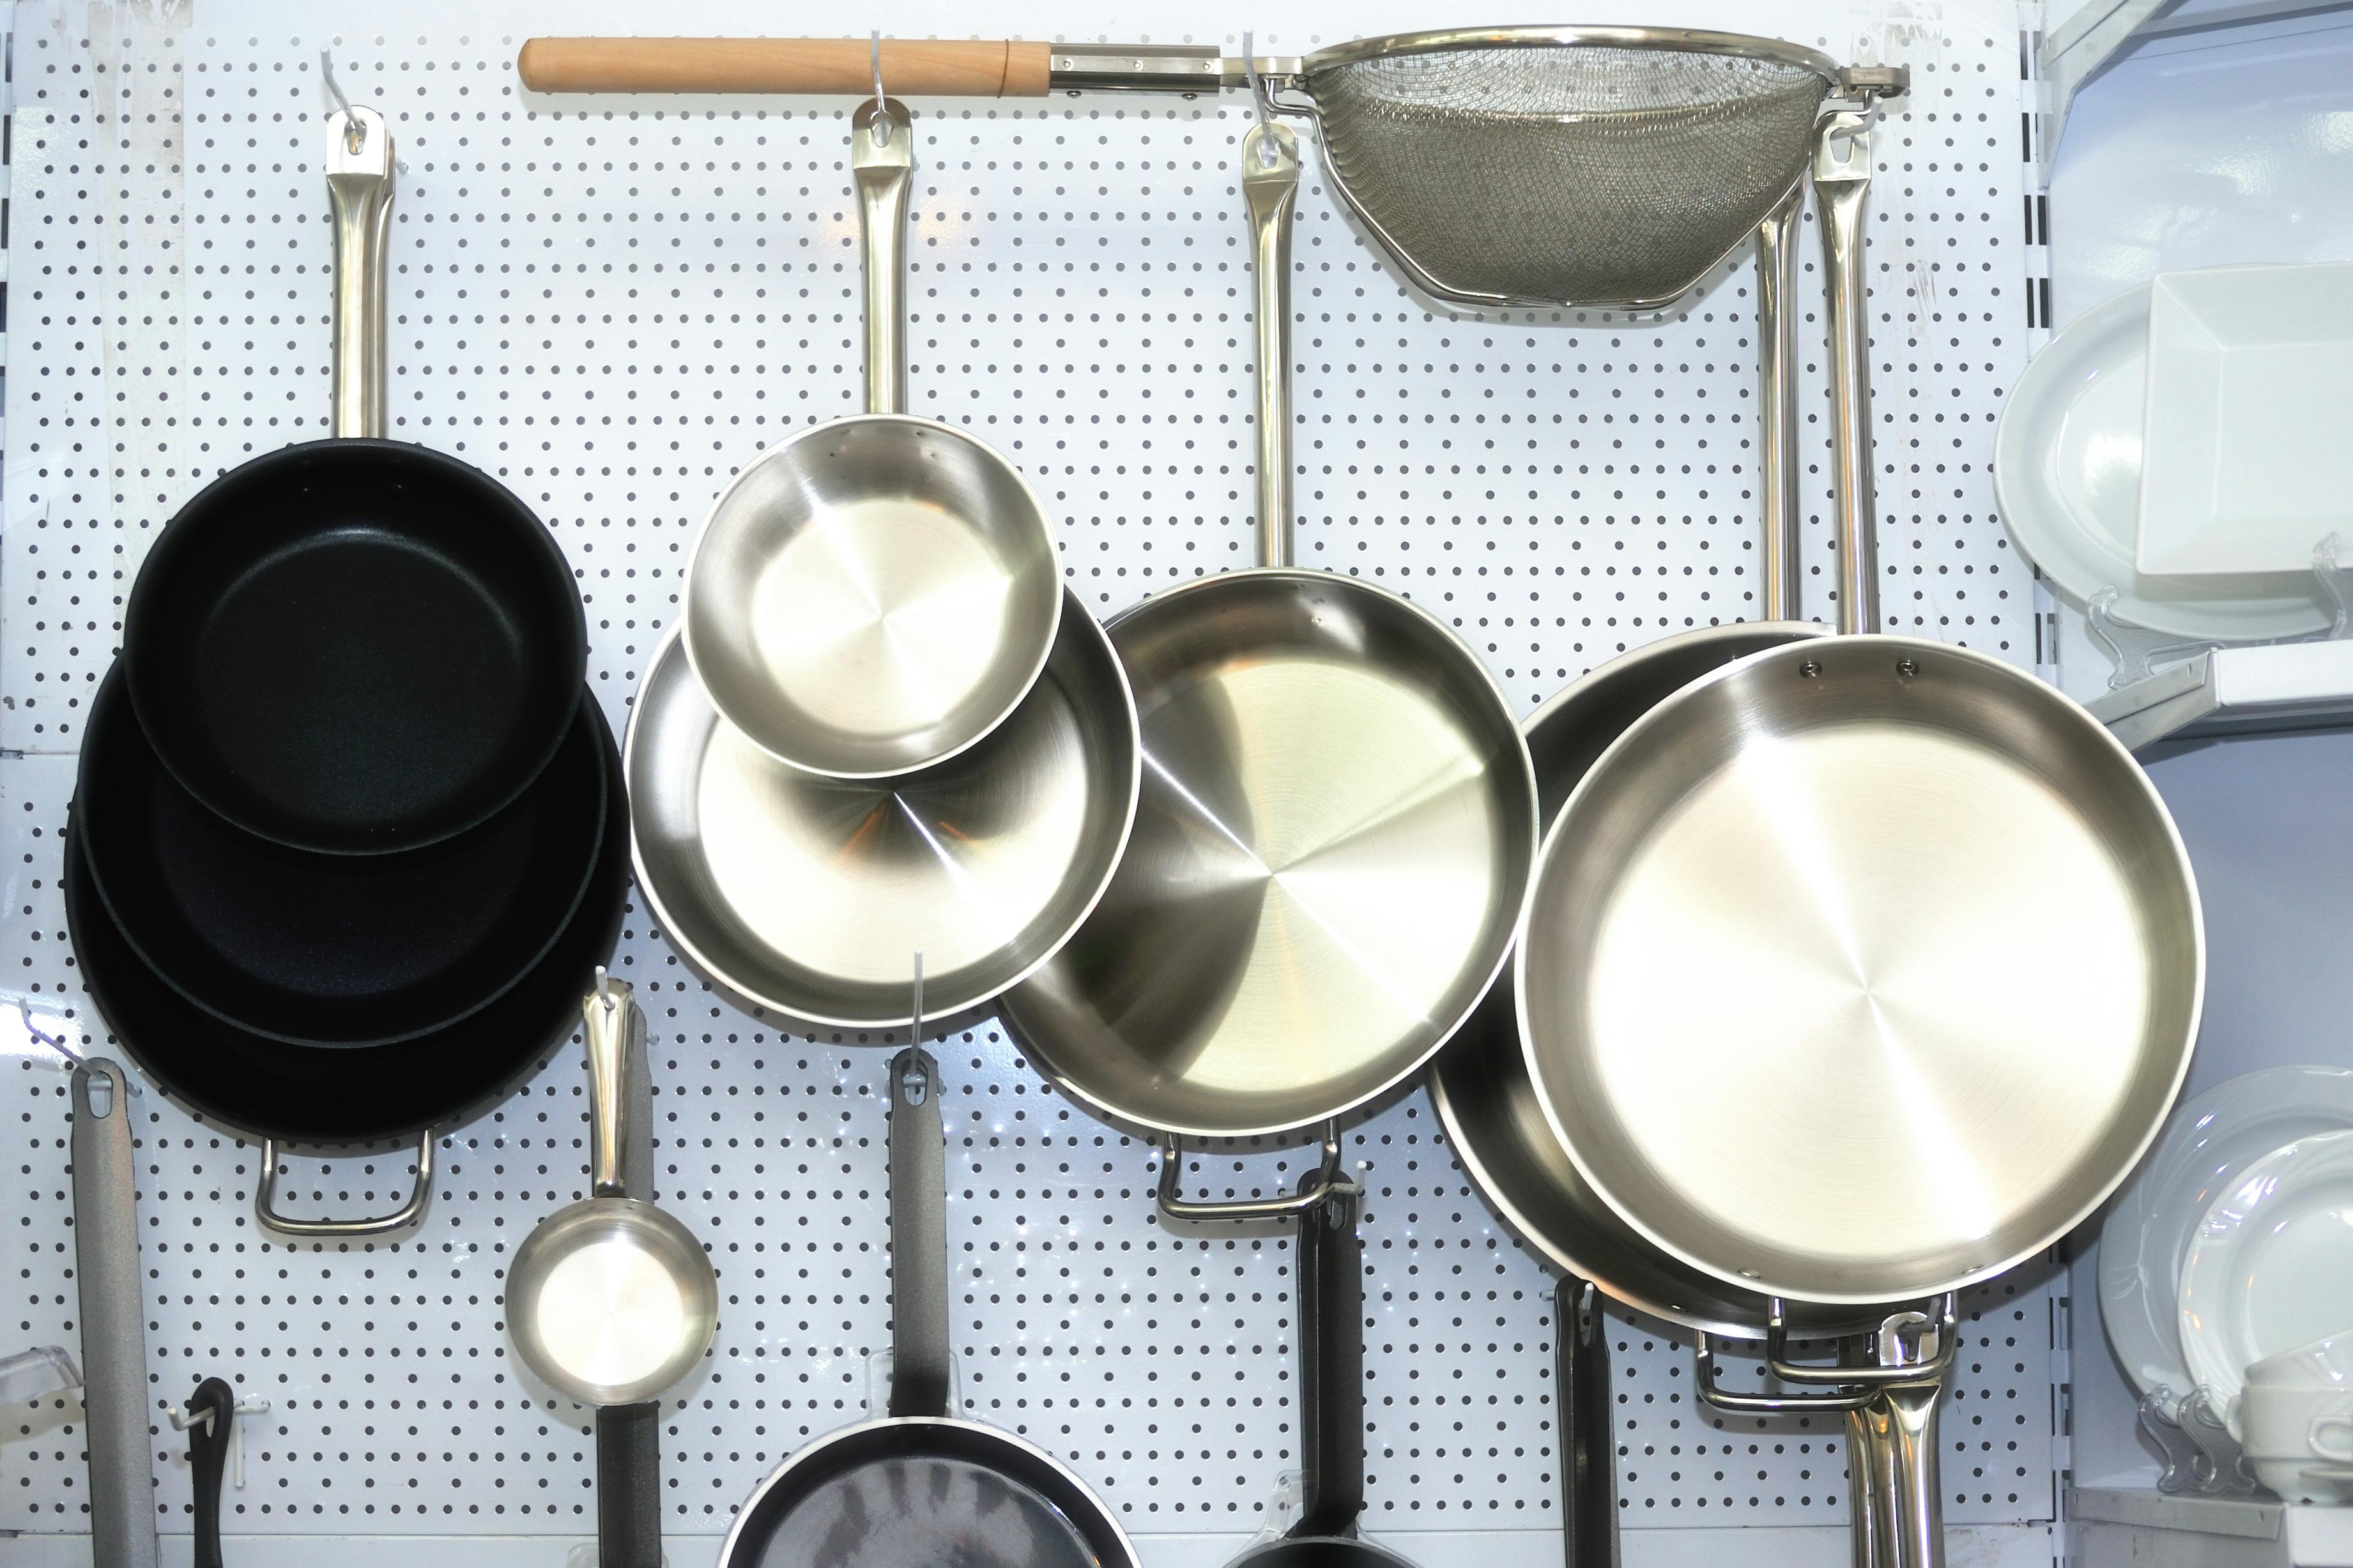 Cast Iron vs. Stainless Steel: Which Is Best for Your Kitchen?